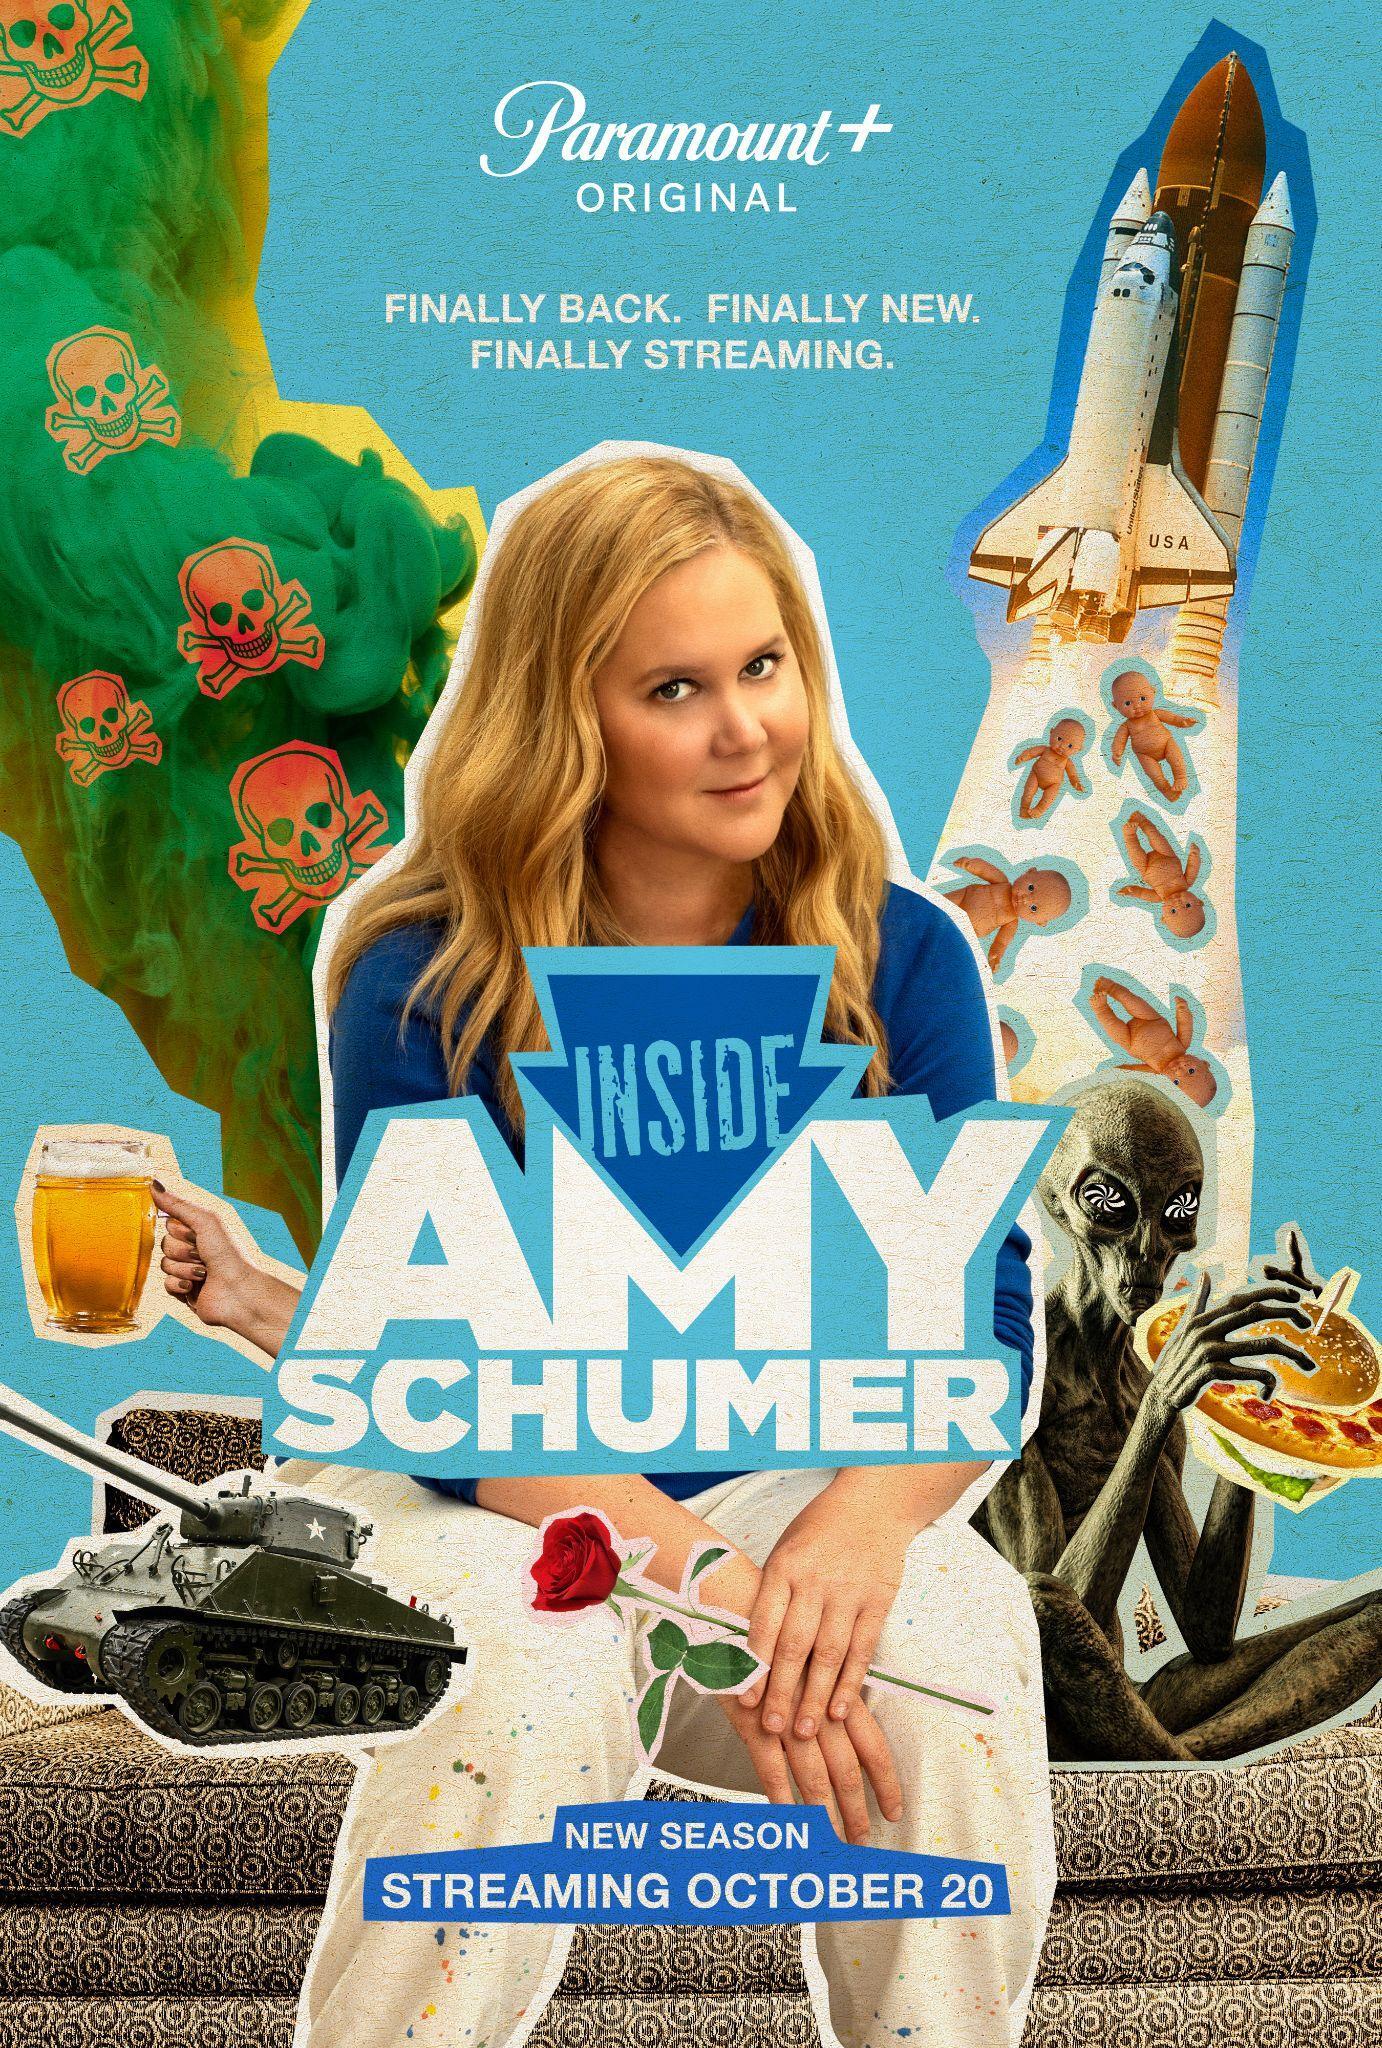 Inside Amy Schumer on Paramount+